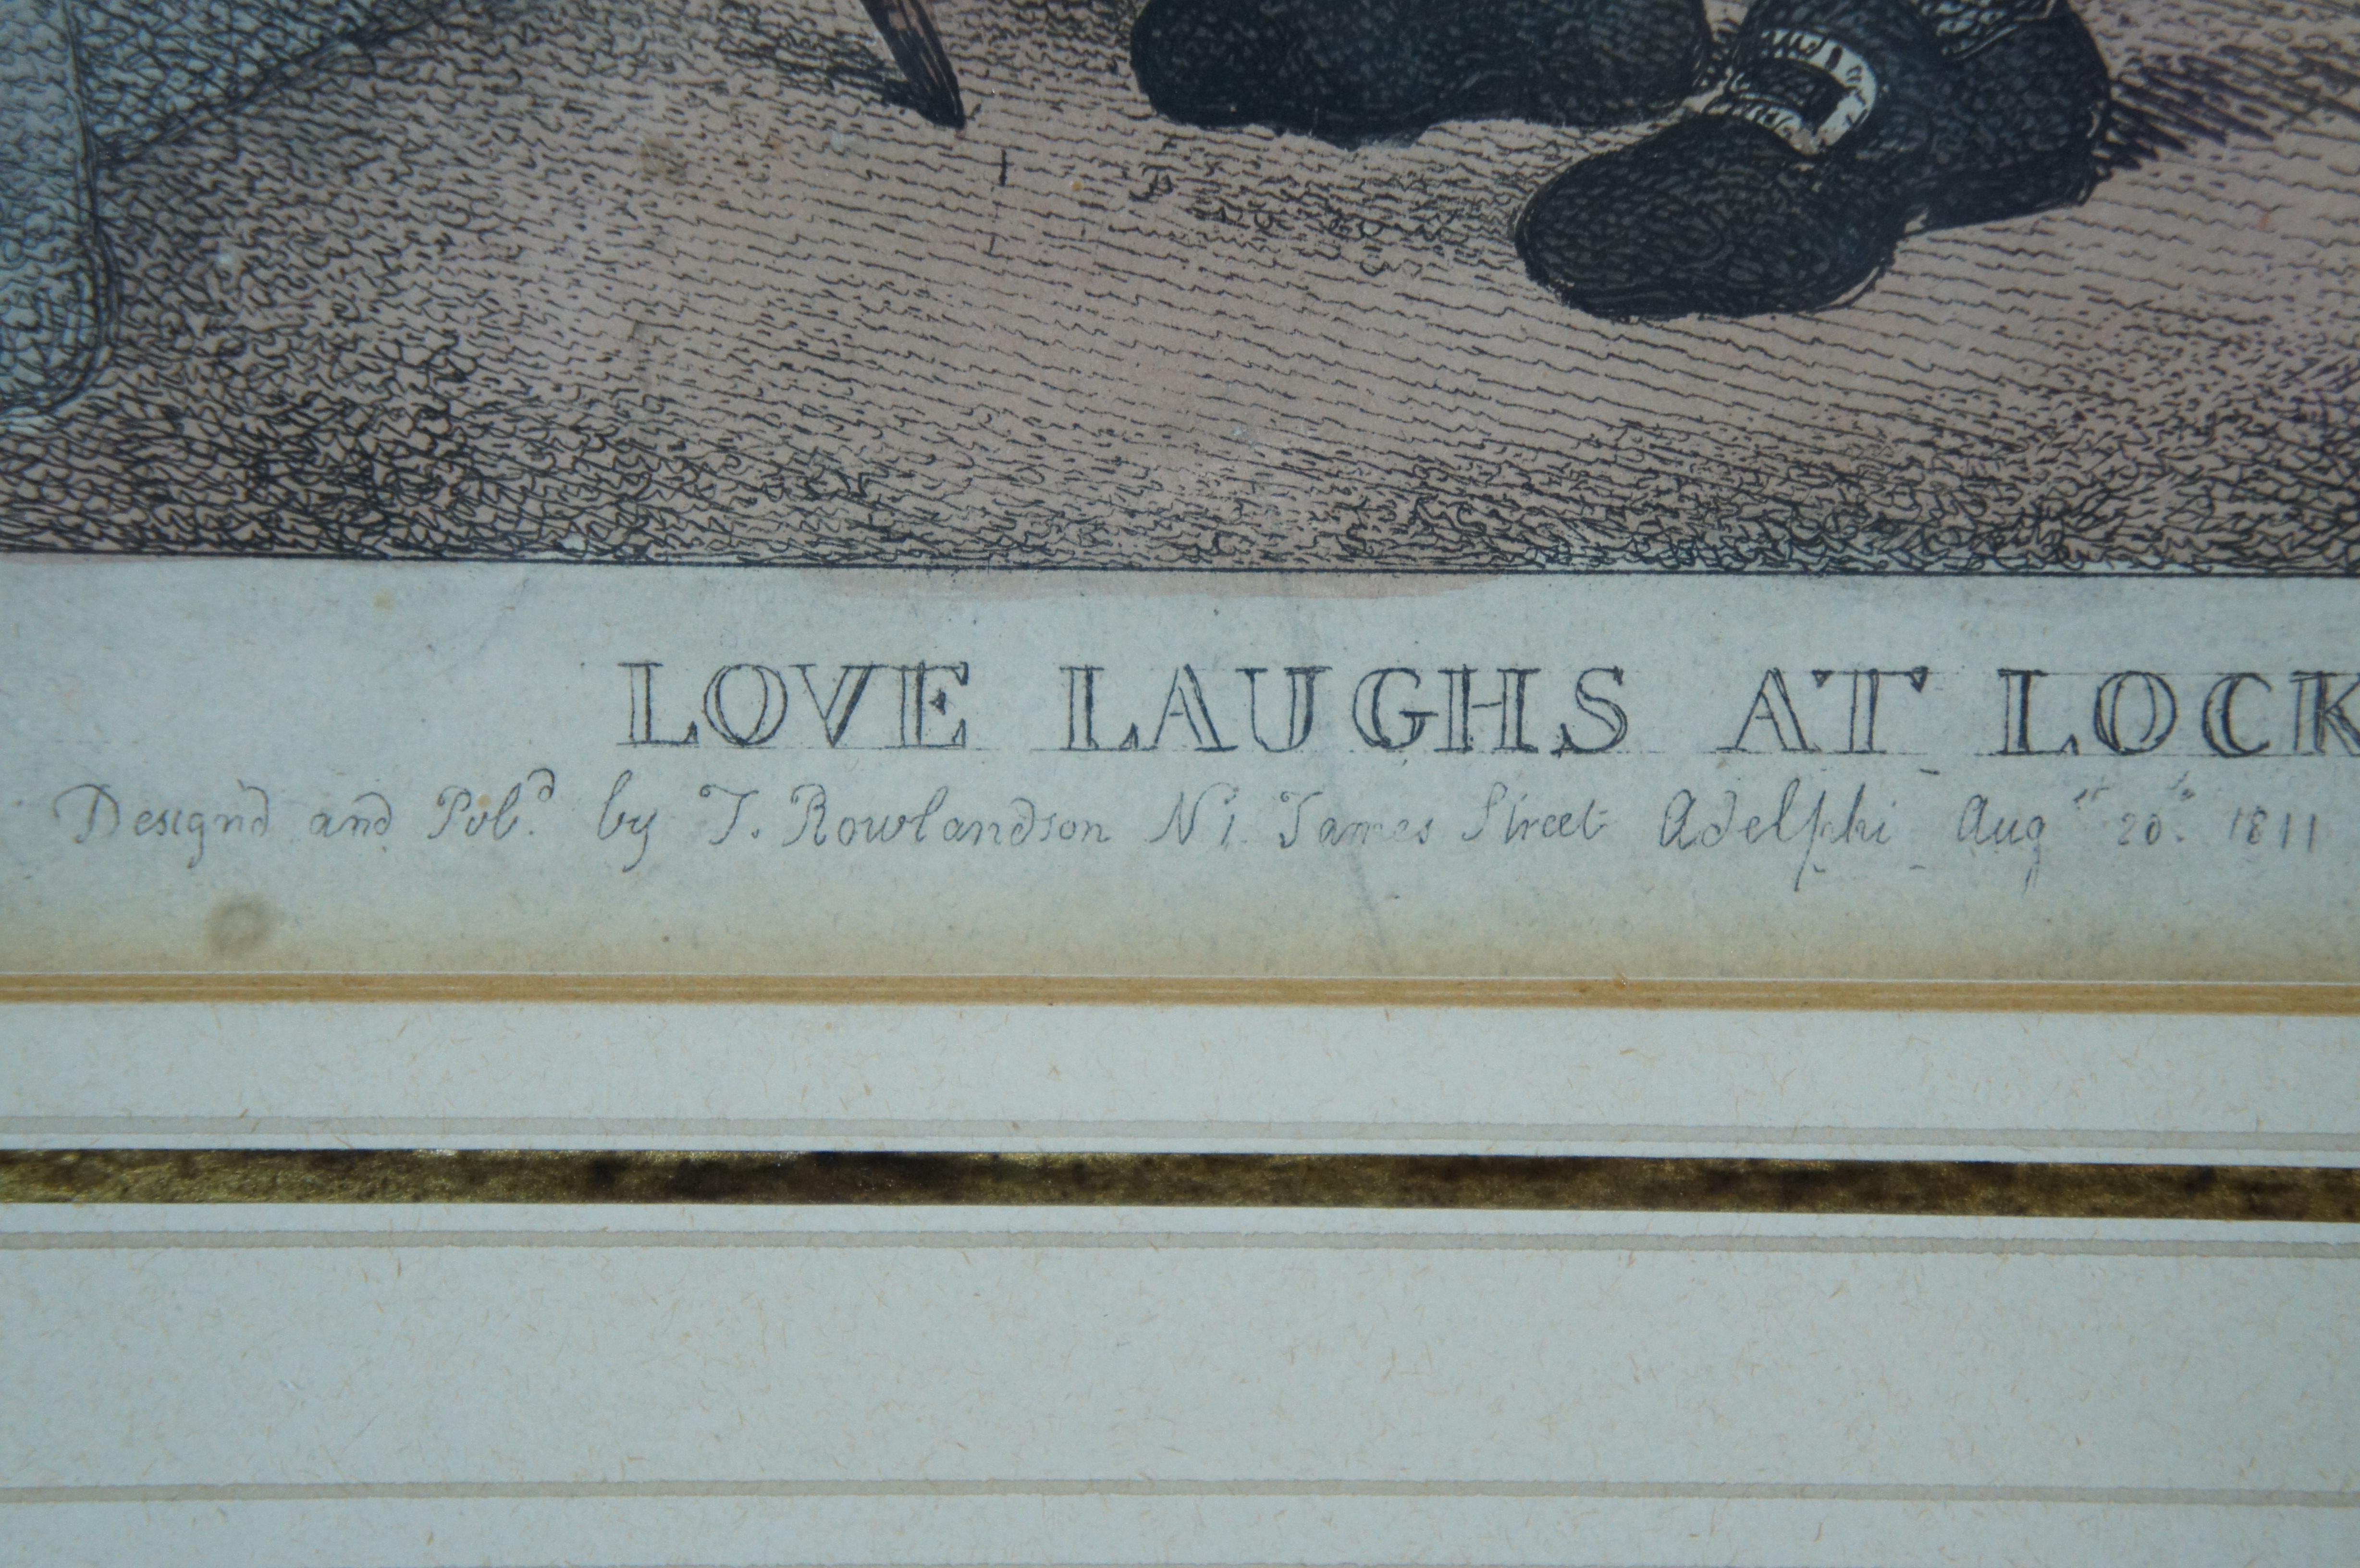 Antique 1811 Thomas Rowlandson Love Laughs at Locksmiths Colored Engraving 21